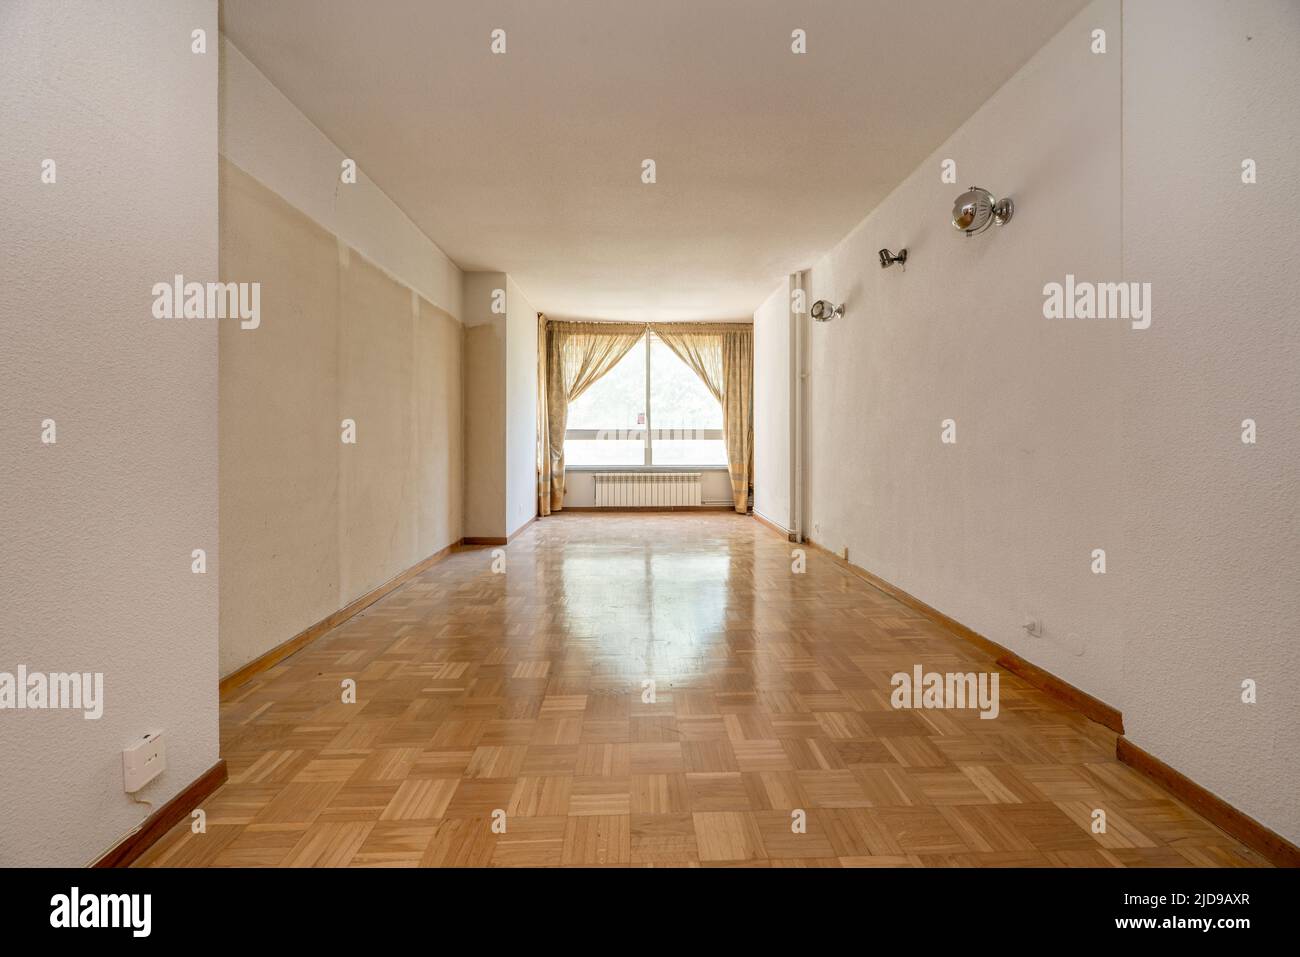 Empty living room with glossy parquet flooring, curtained window and white walls Stock Photo